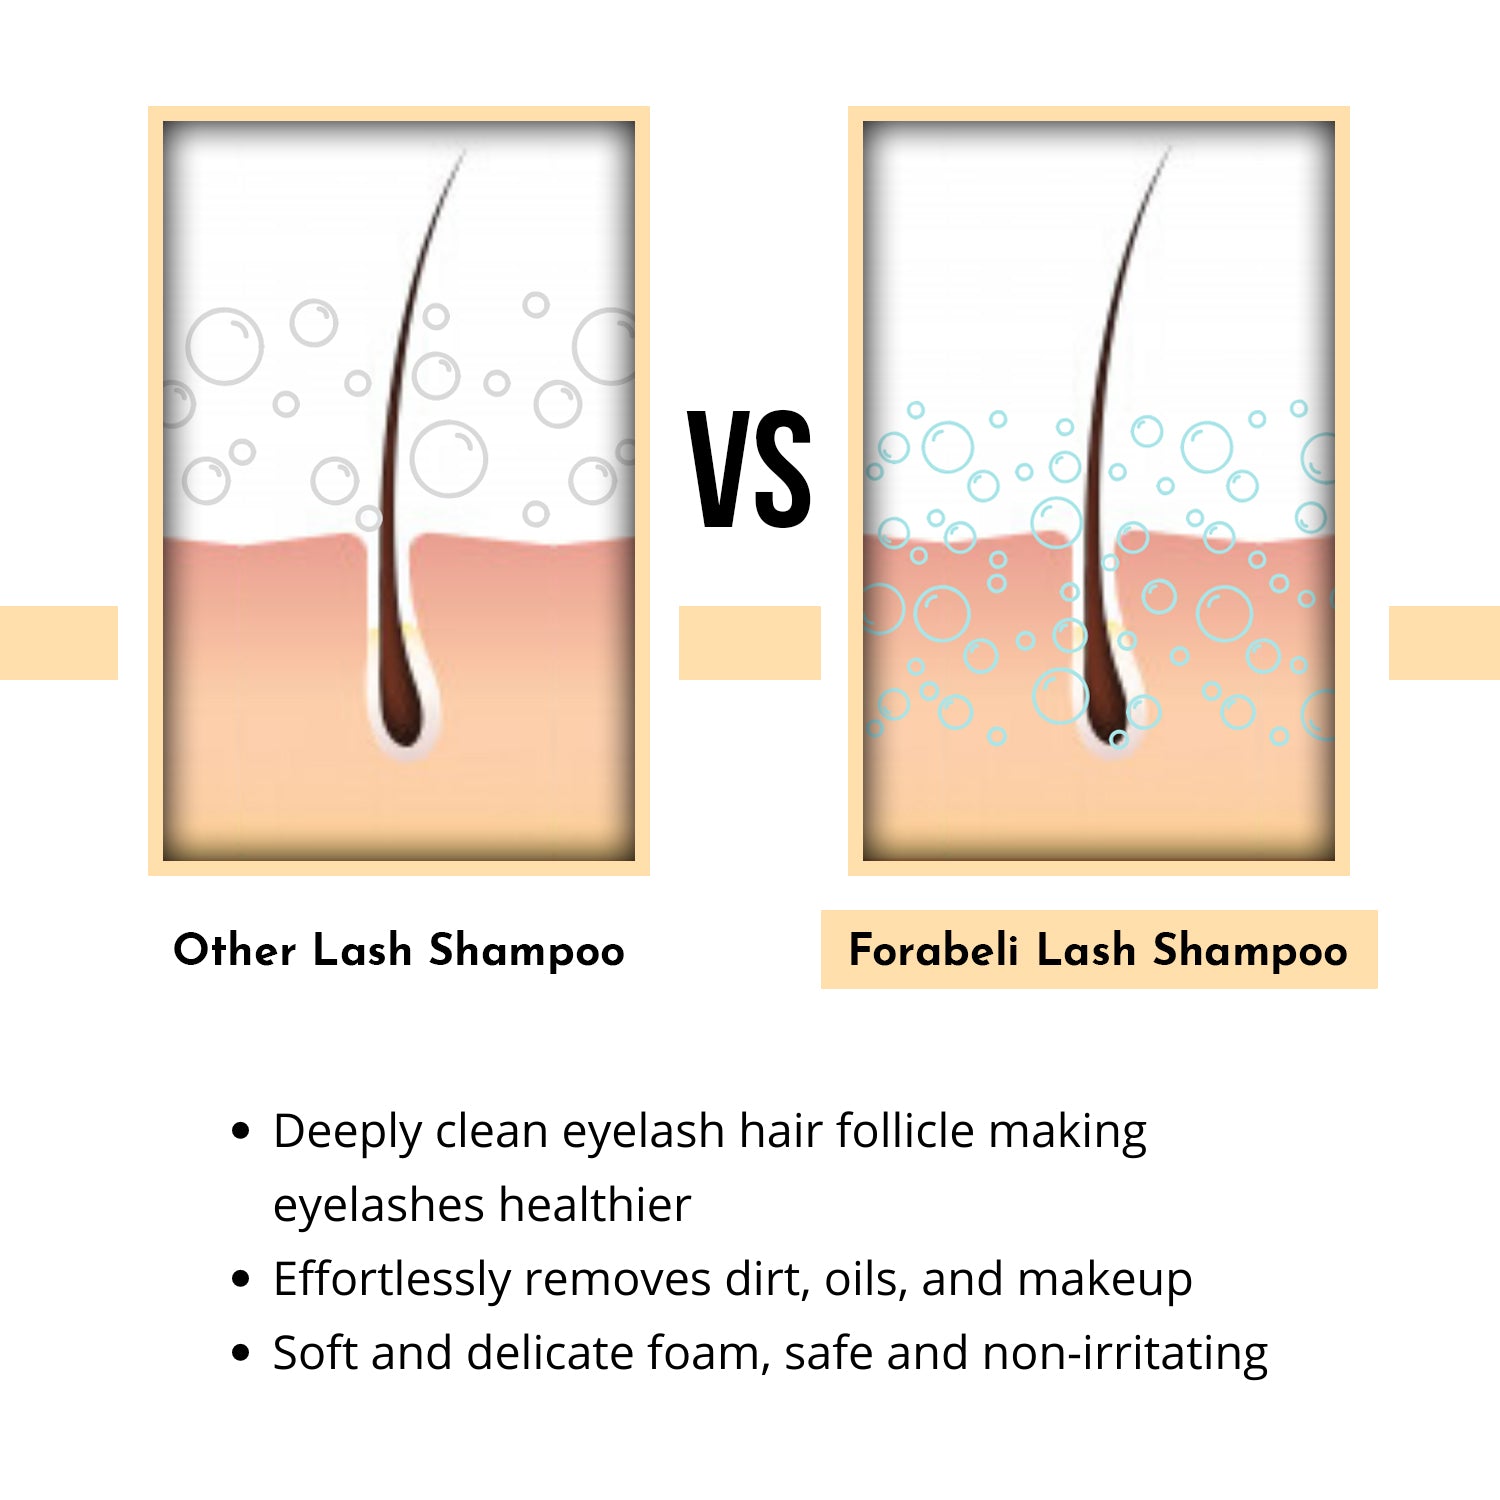 This Forabeli lash shampoo uses 6 plant extracts to create a shield for lash extensions, guarding against pollutants and damage. It improves extension retention, repairs and strengthens lashes, and maintains vibrant colors for a lasting look.